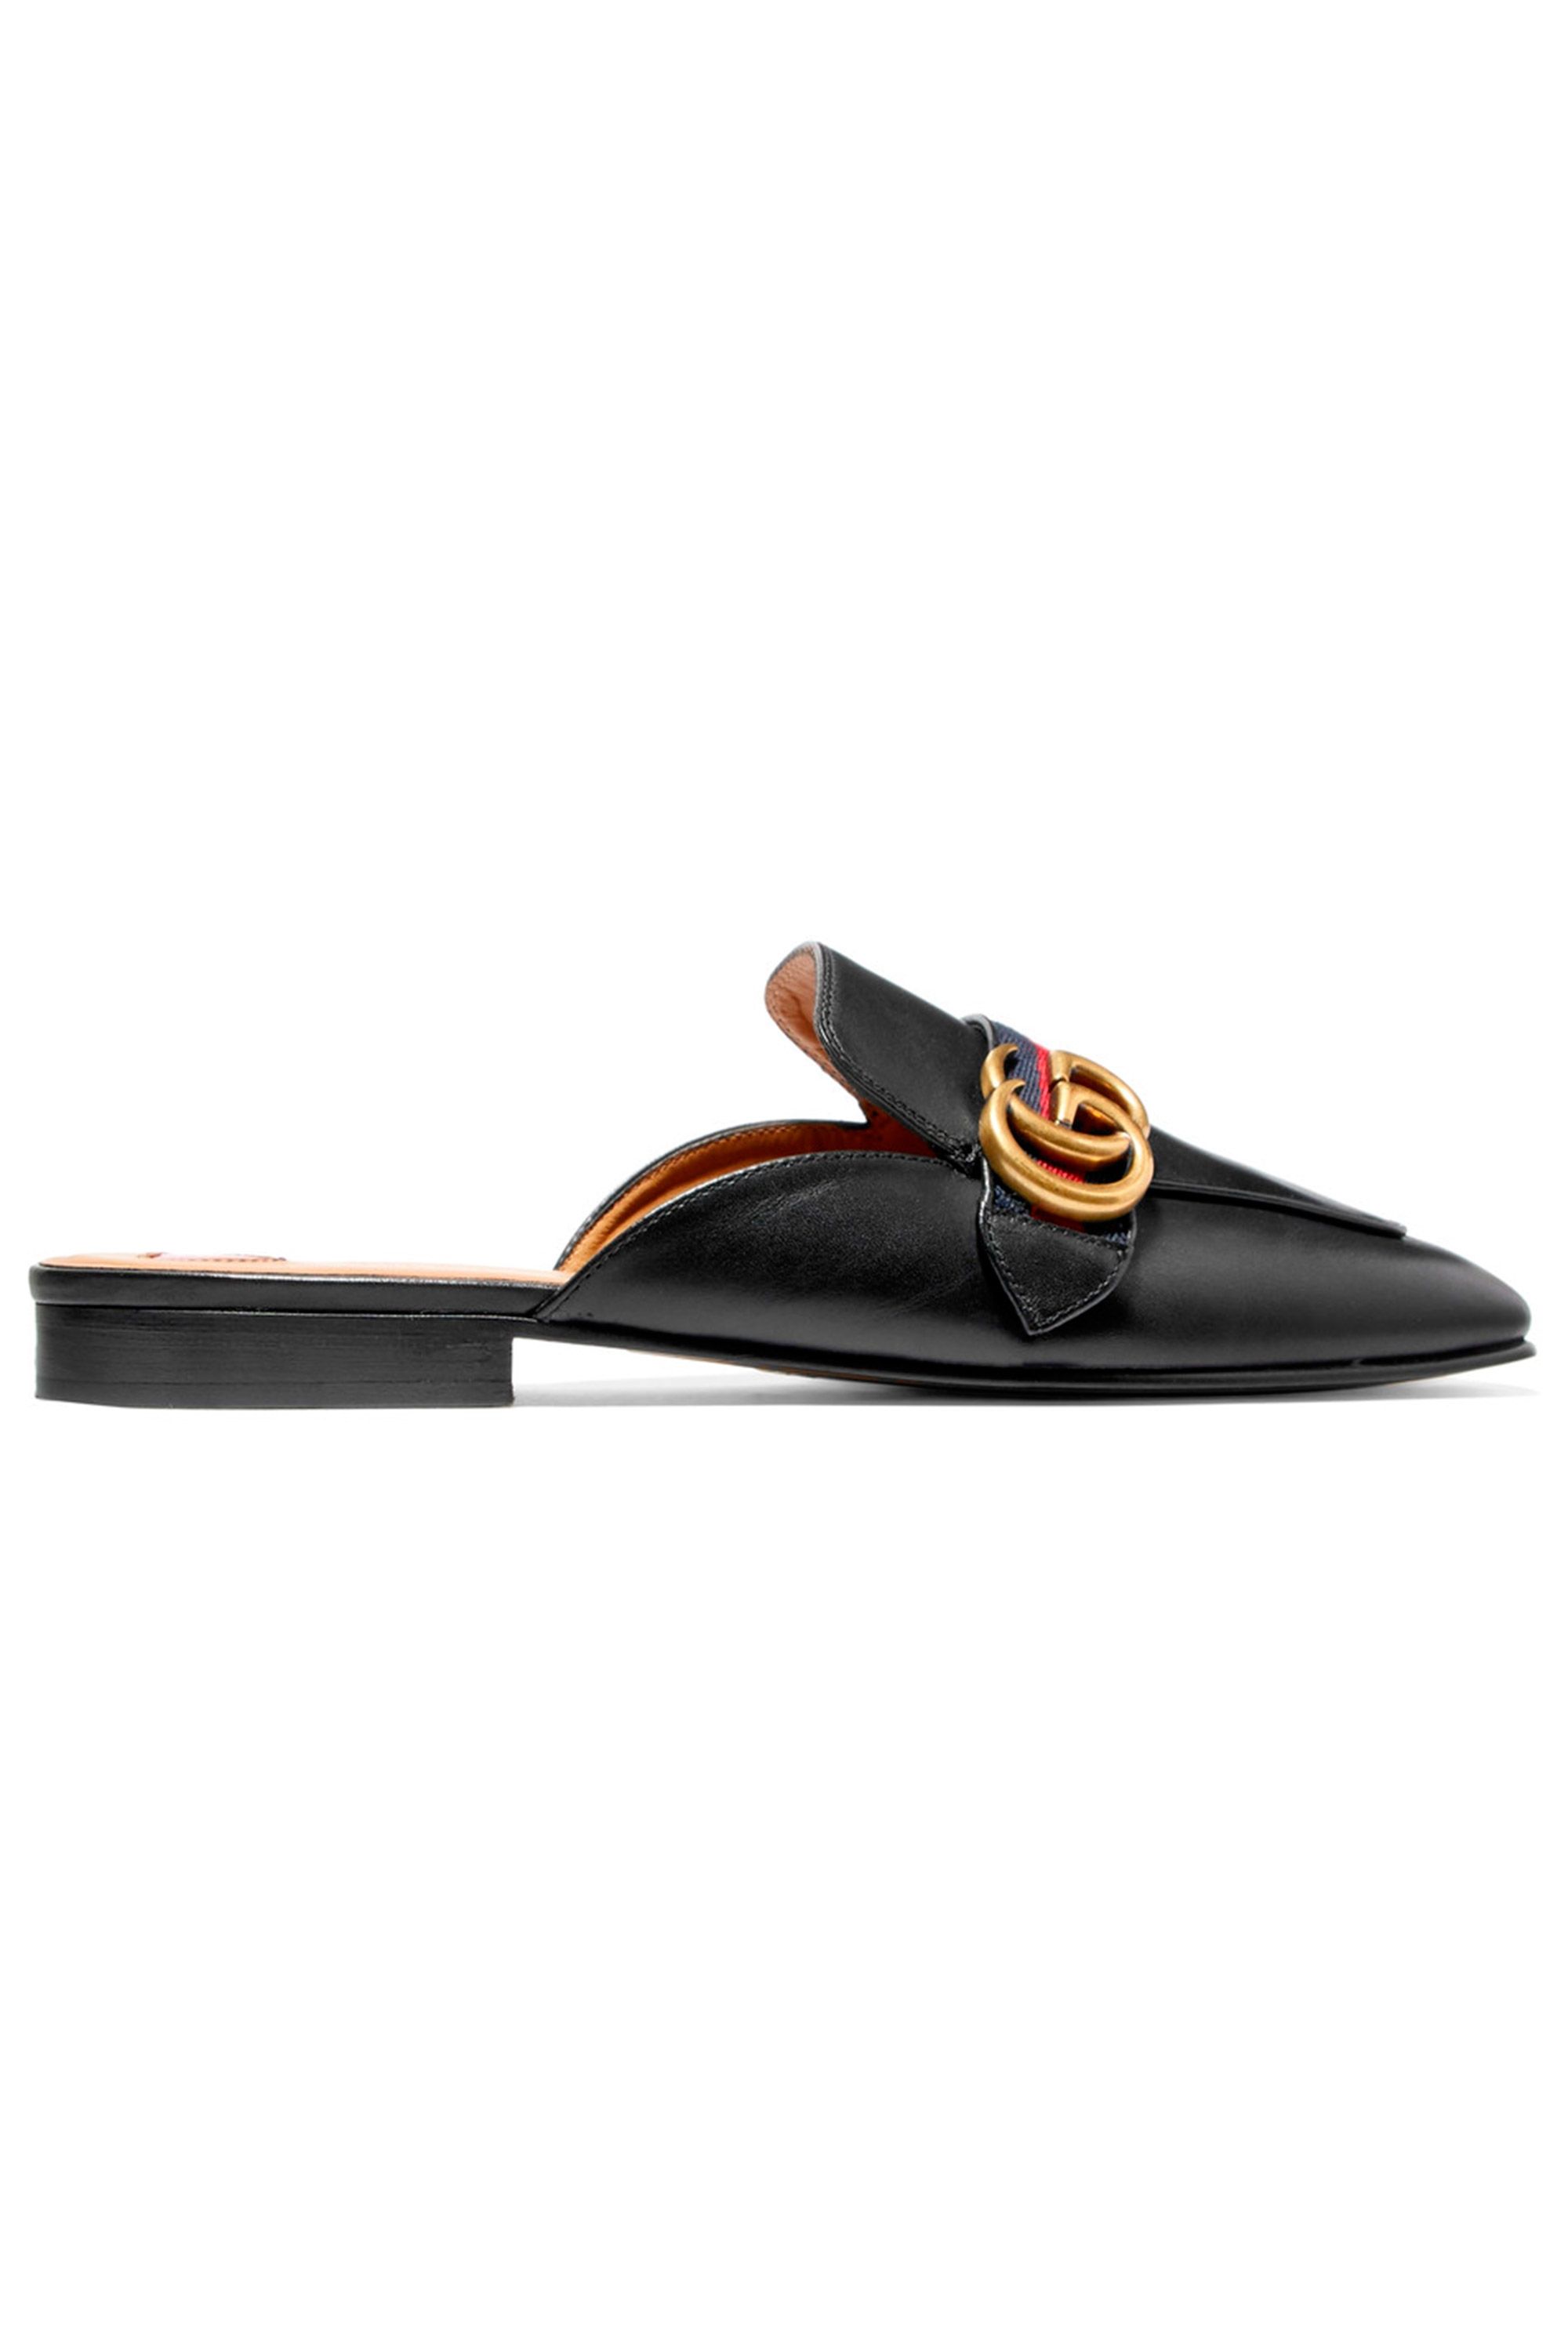 gucci loafers open back